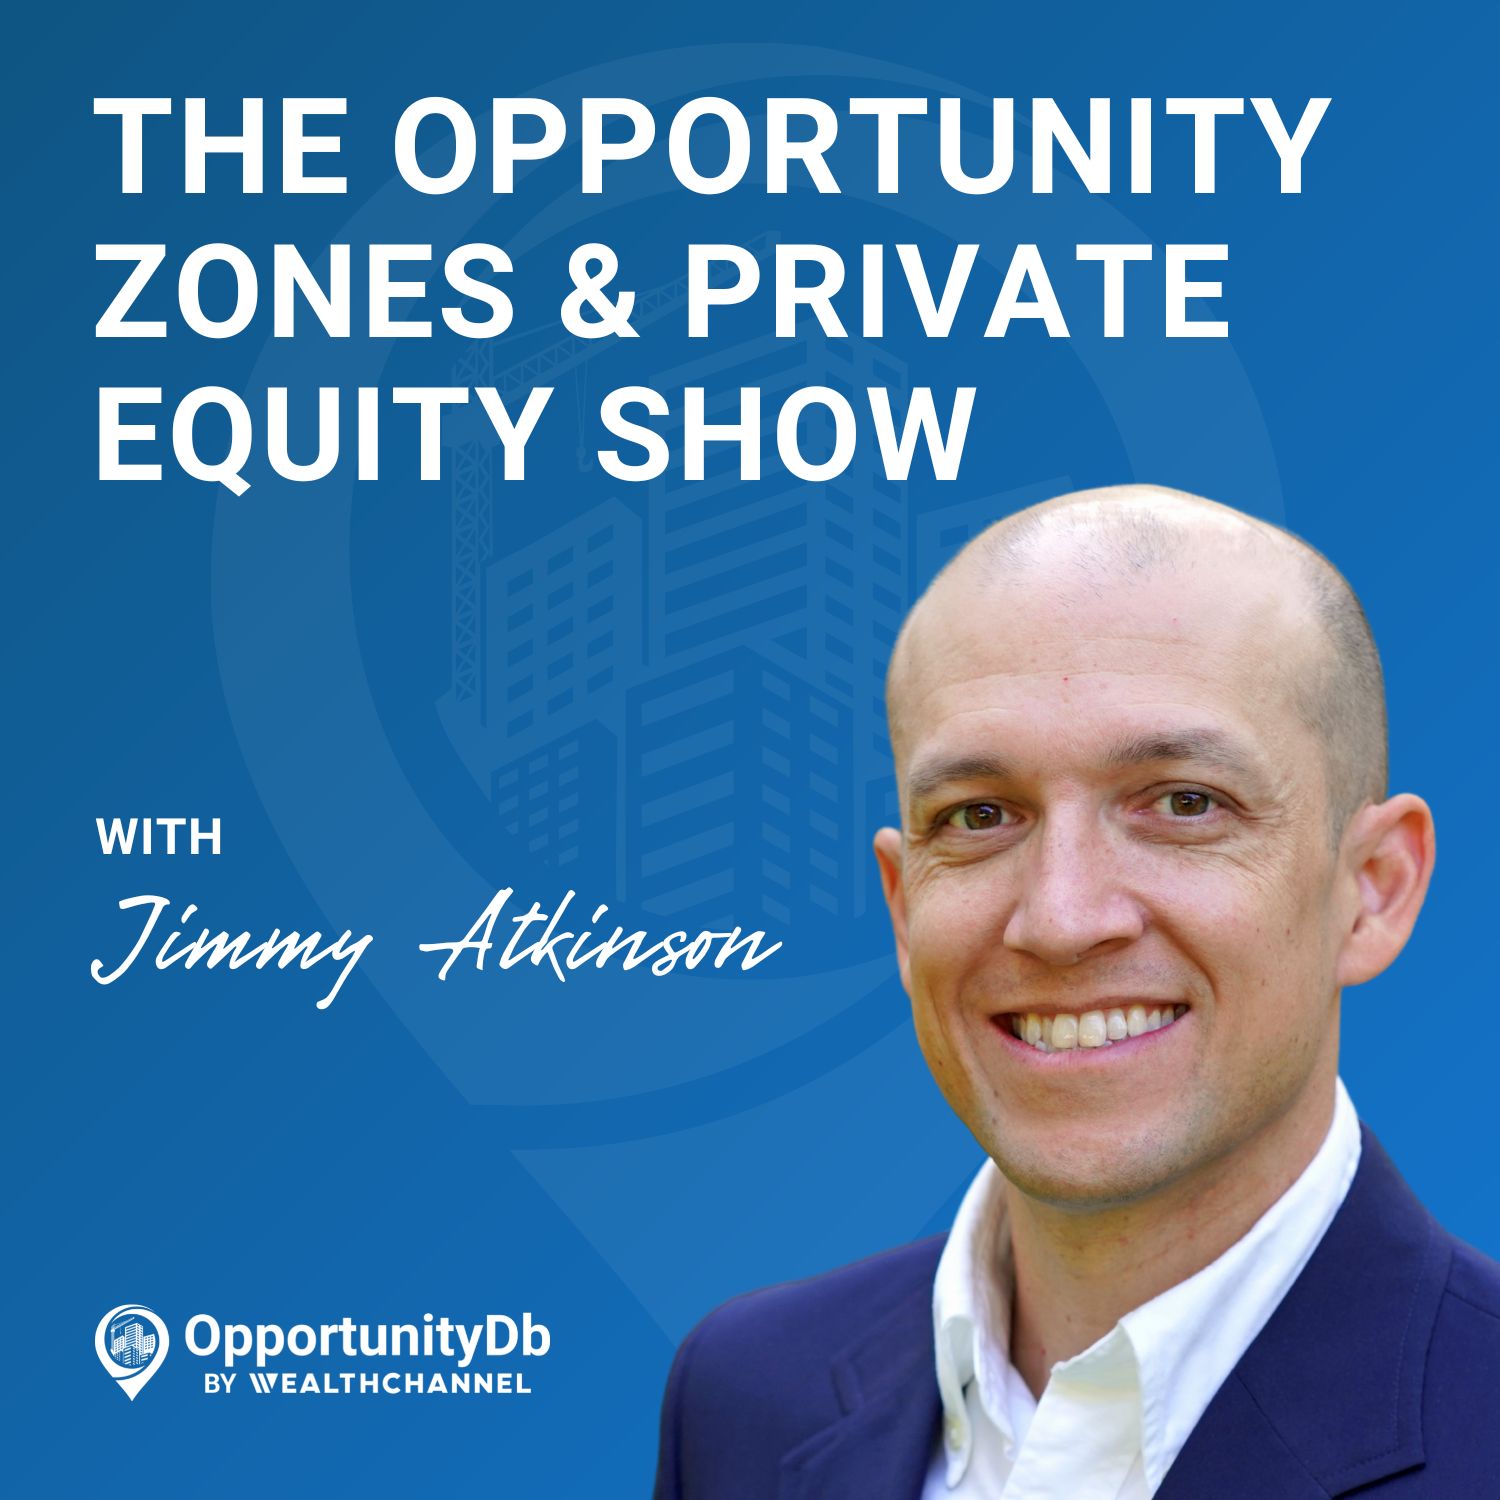 The Opportunity Zones & Private Equity Show